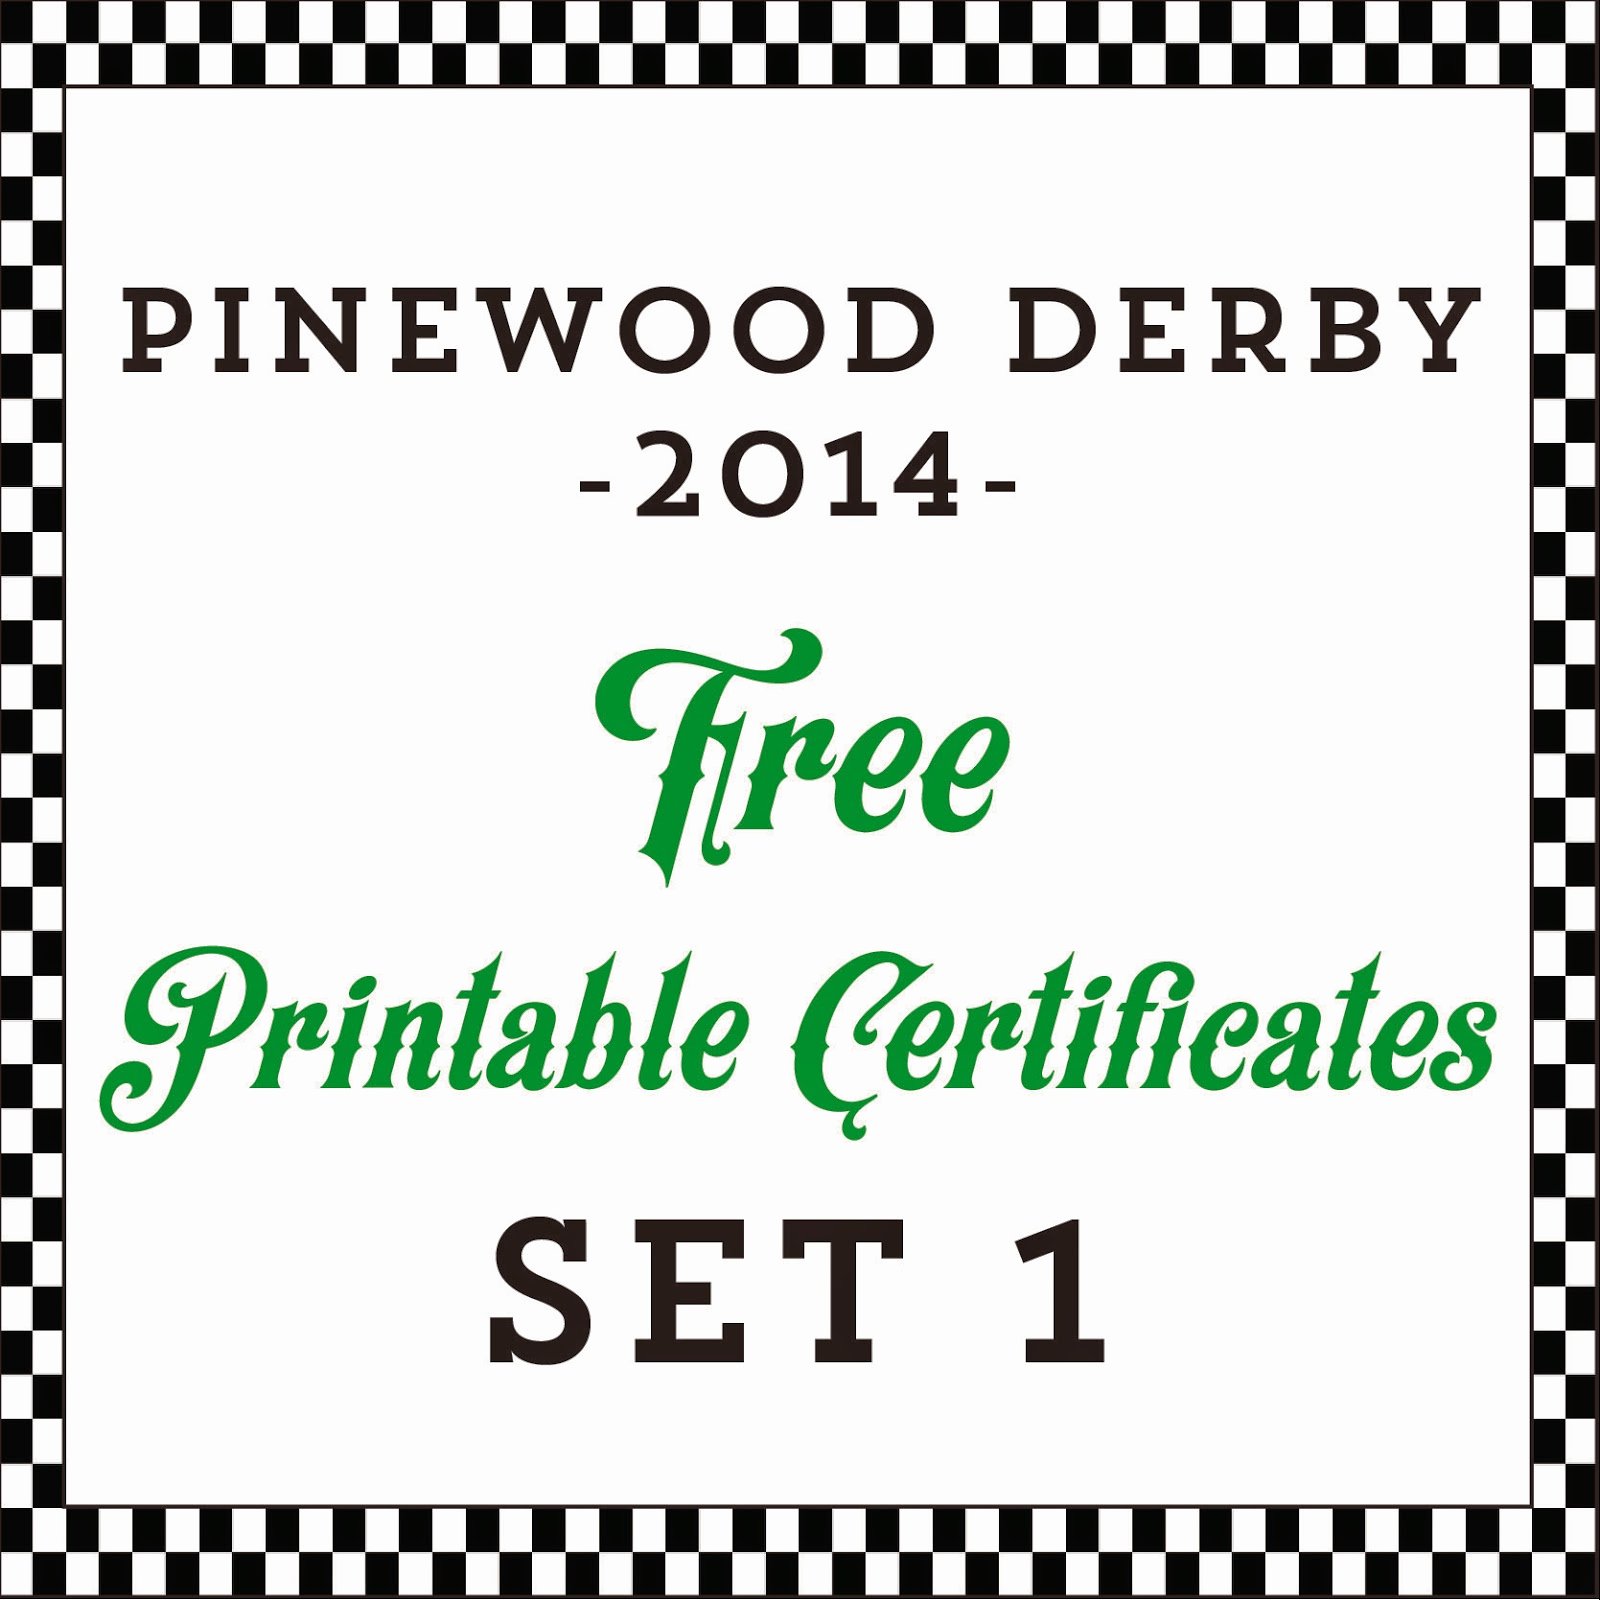 Pinewood Derby Certificate Template Fresh Hot Modity Home Decor Free Printable Pinewood Derby Awards